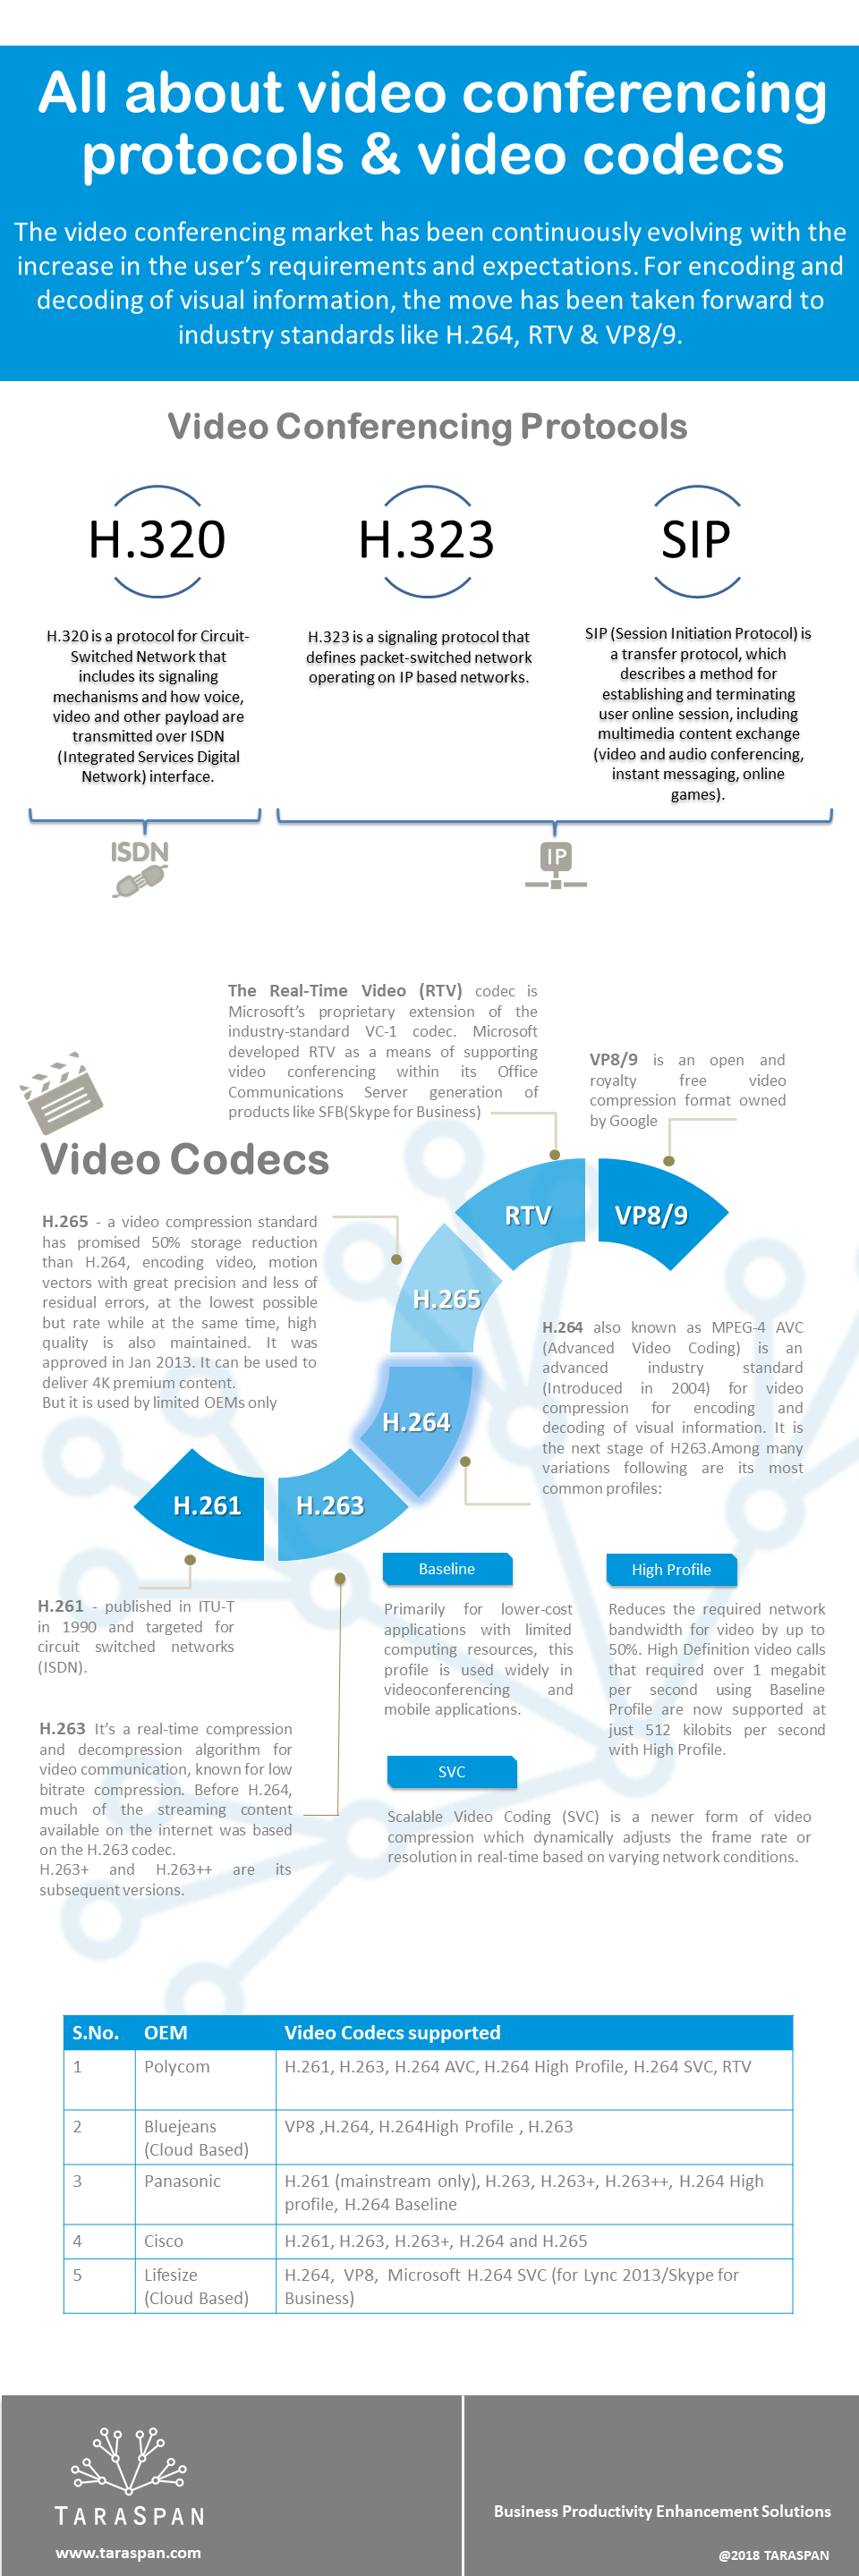 All about video conferencing protocols and video codecs